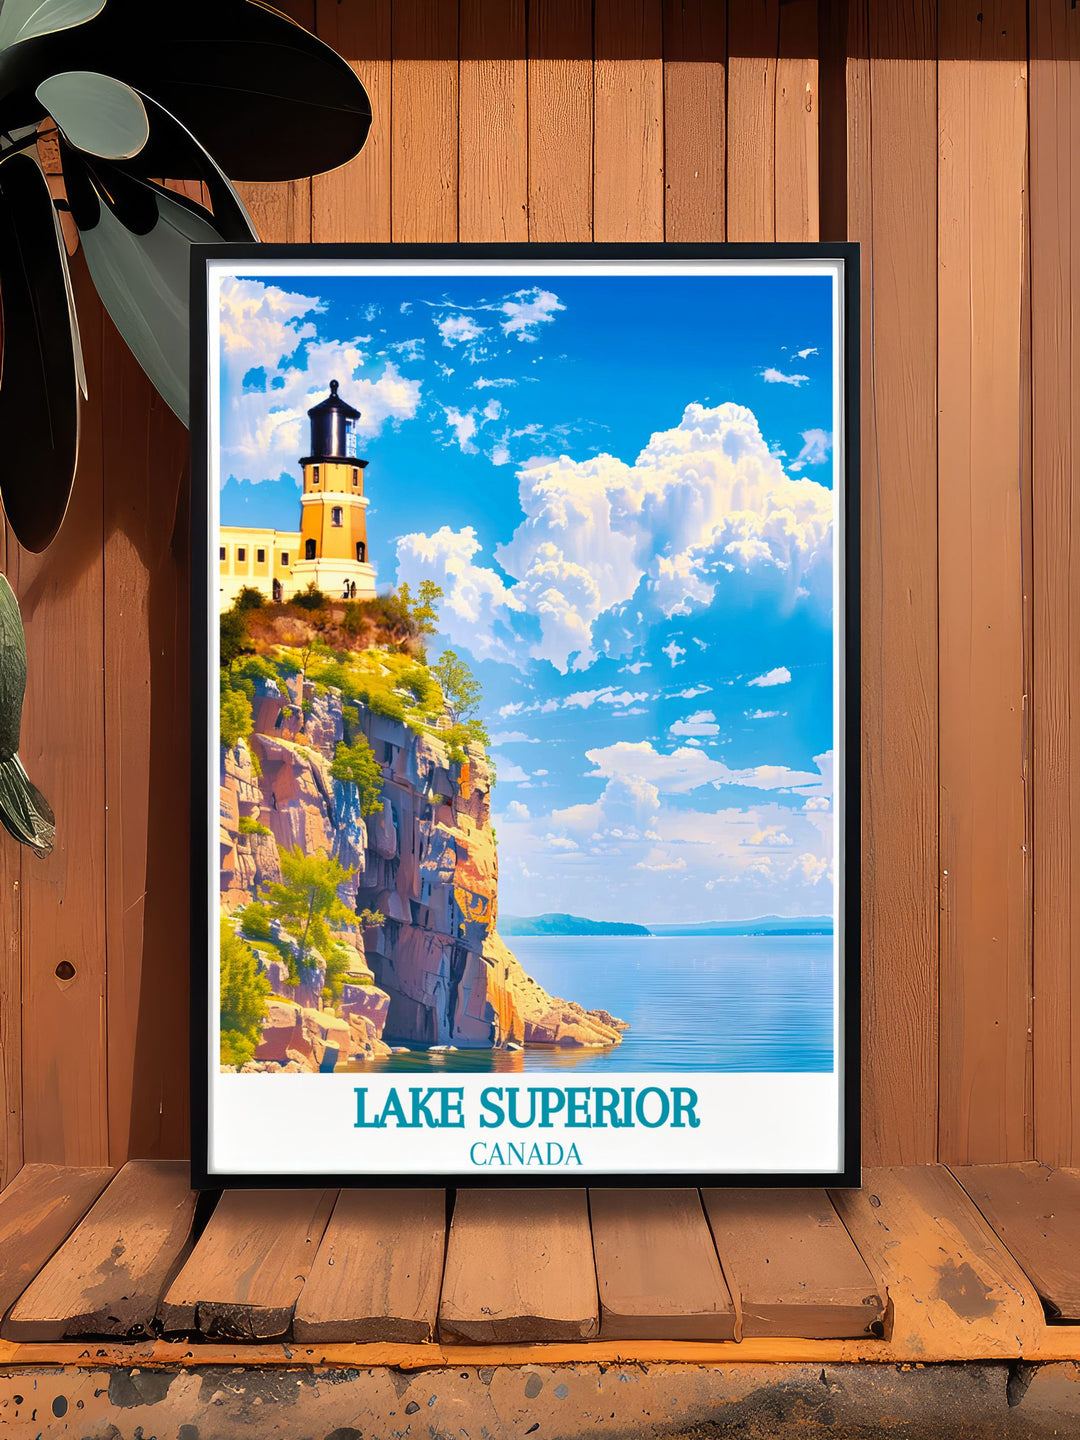 Poster of Split Rock Lighthouse, highlighting its iconic silhouette against Lake Superior, celebrating its rich legacy and historical significance.